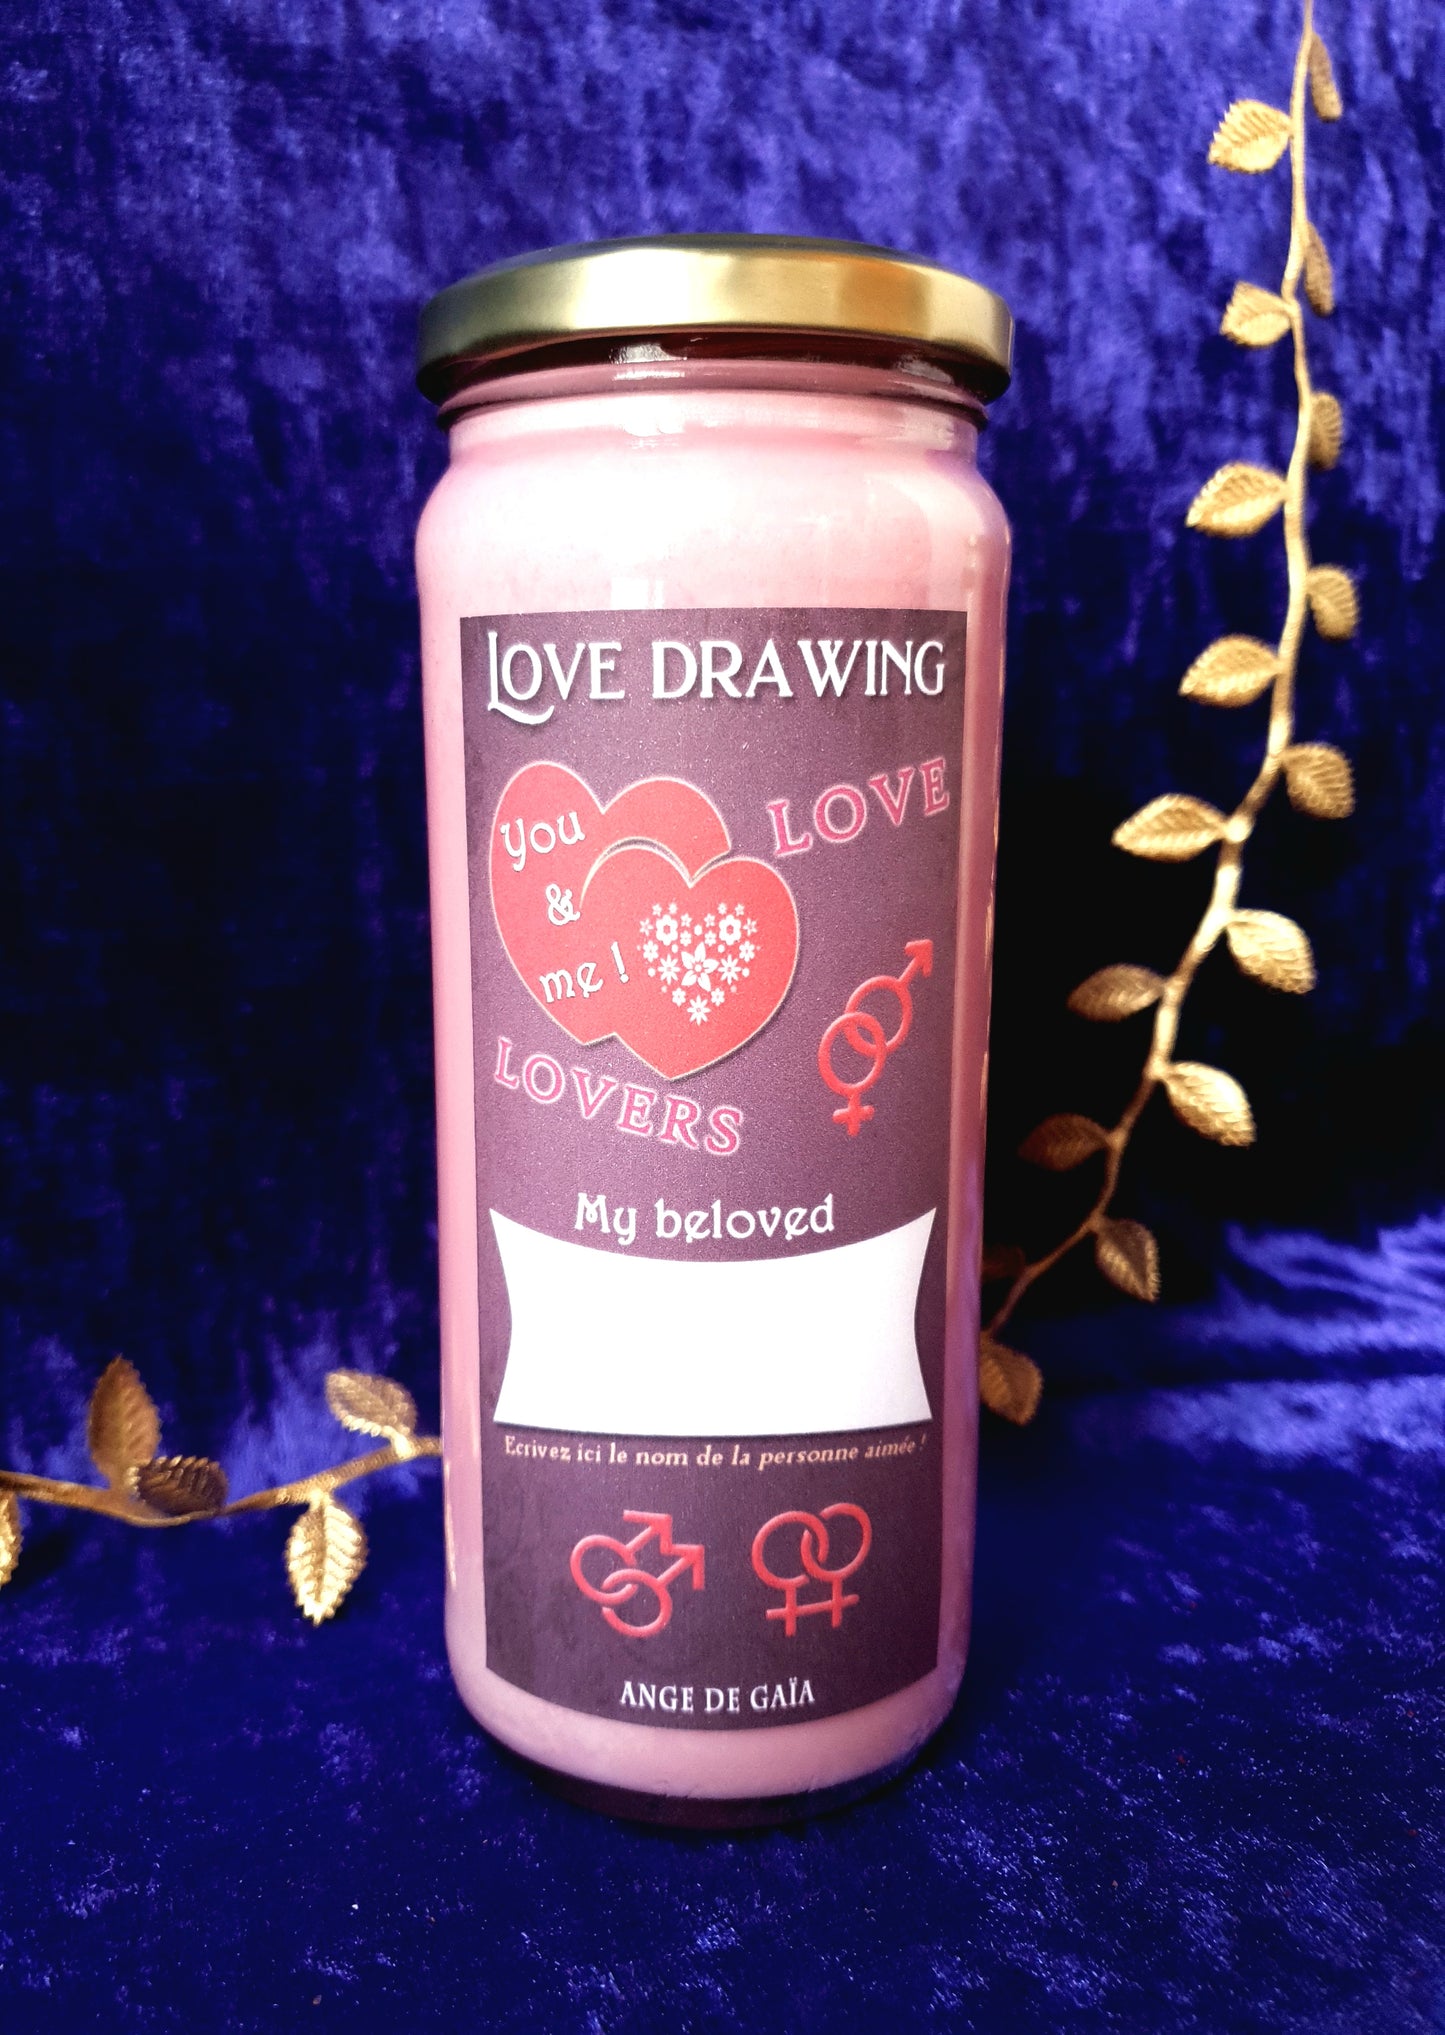 Bougie hoodoo 7 days candle Love Drawing, pour attirer l'amour. 